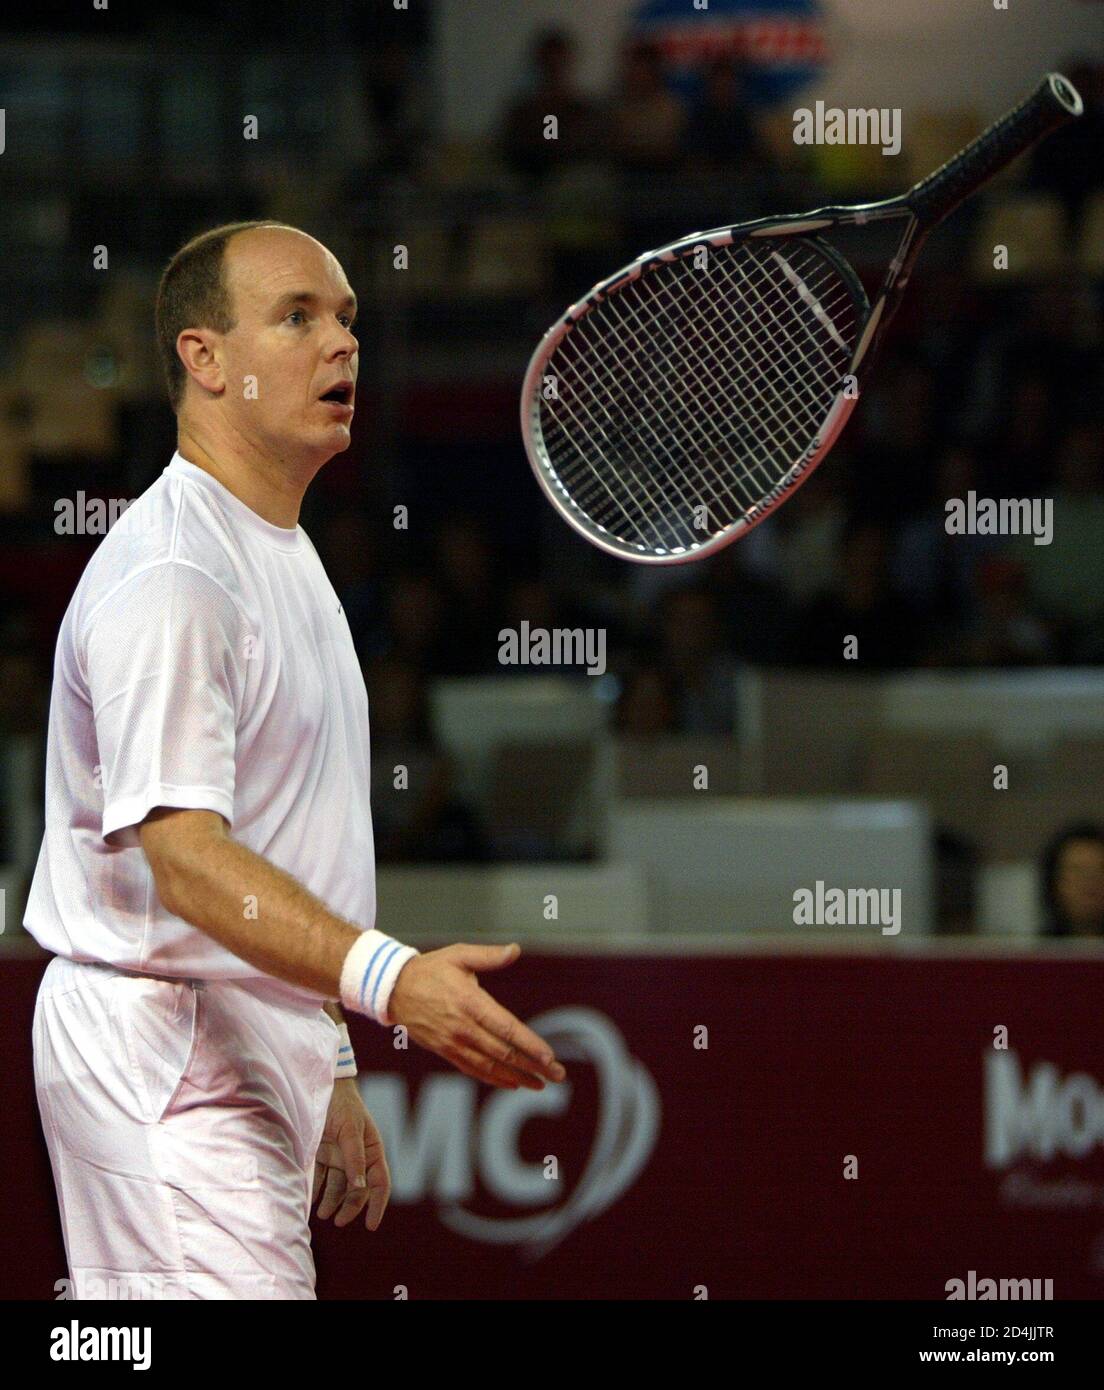 Prince Albert of Monaco throws his racketat the ATP senior tour champion  legends of Monte Carlo tournament, in Monaco November 22, 2003. Prince  Albert played a doubles match with former U.S. tennis